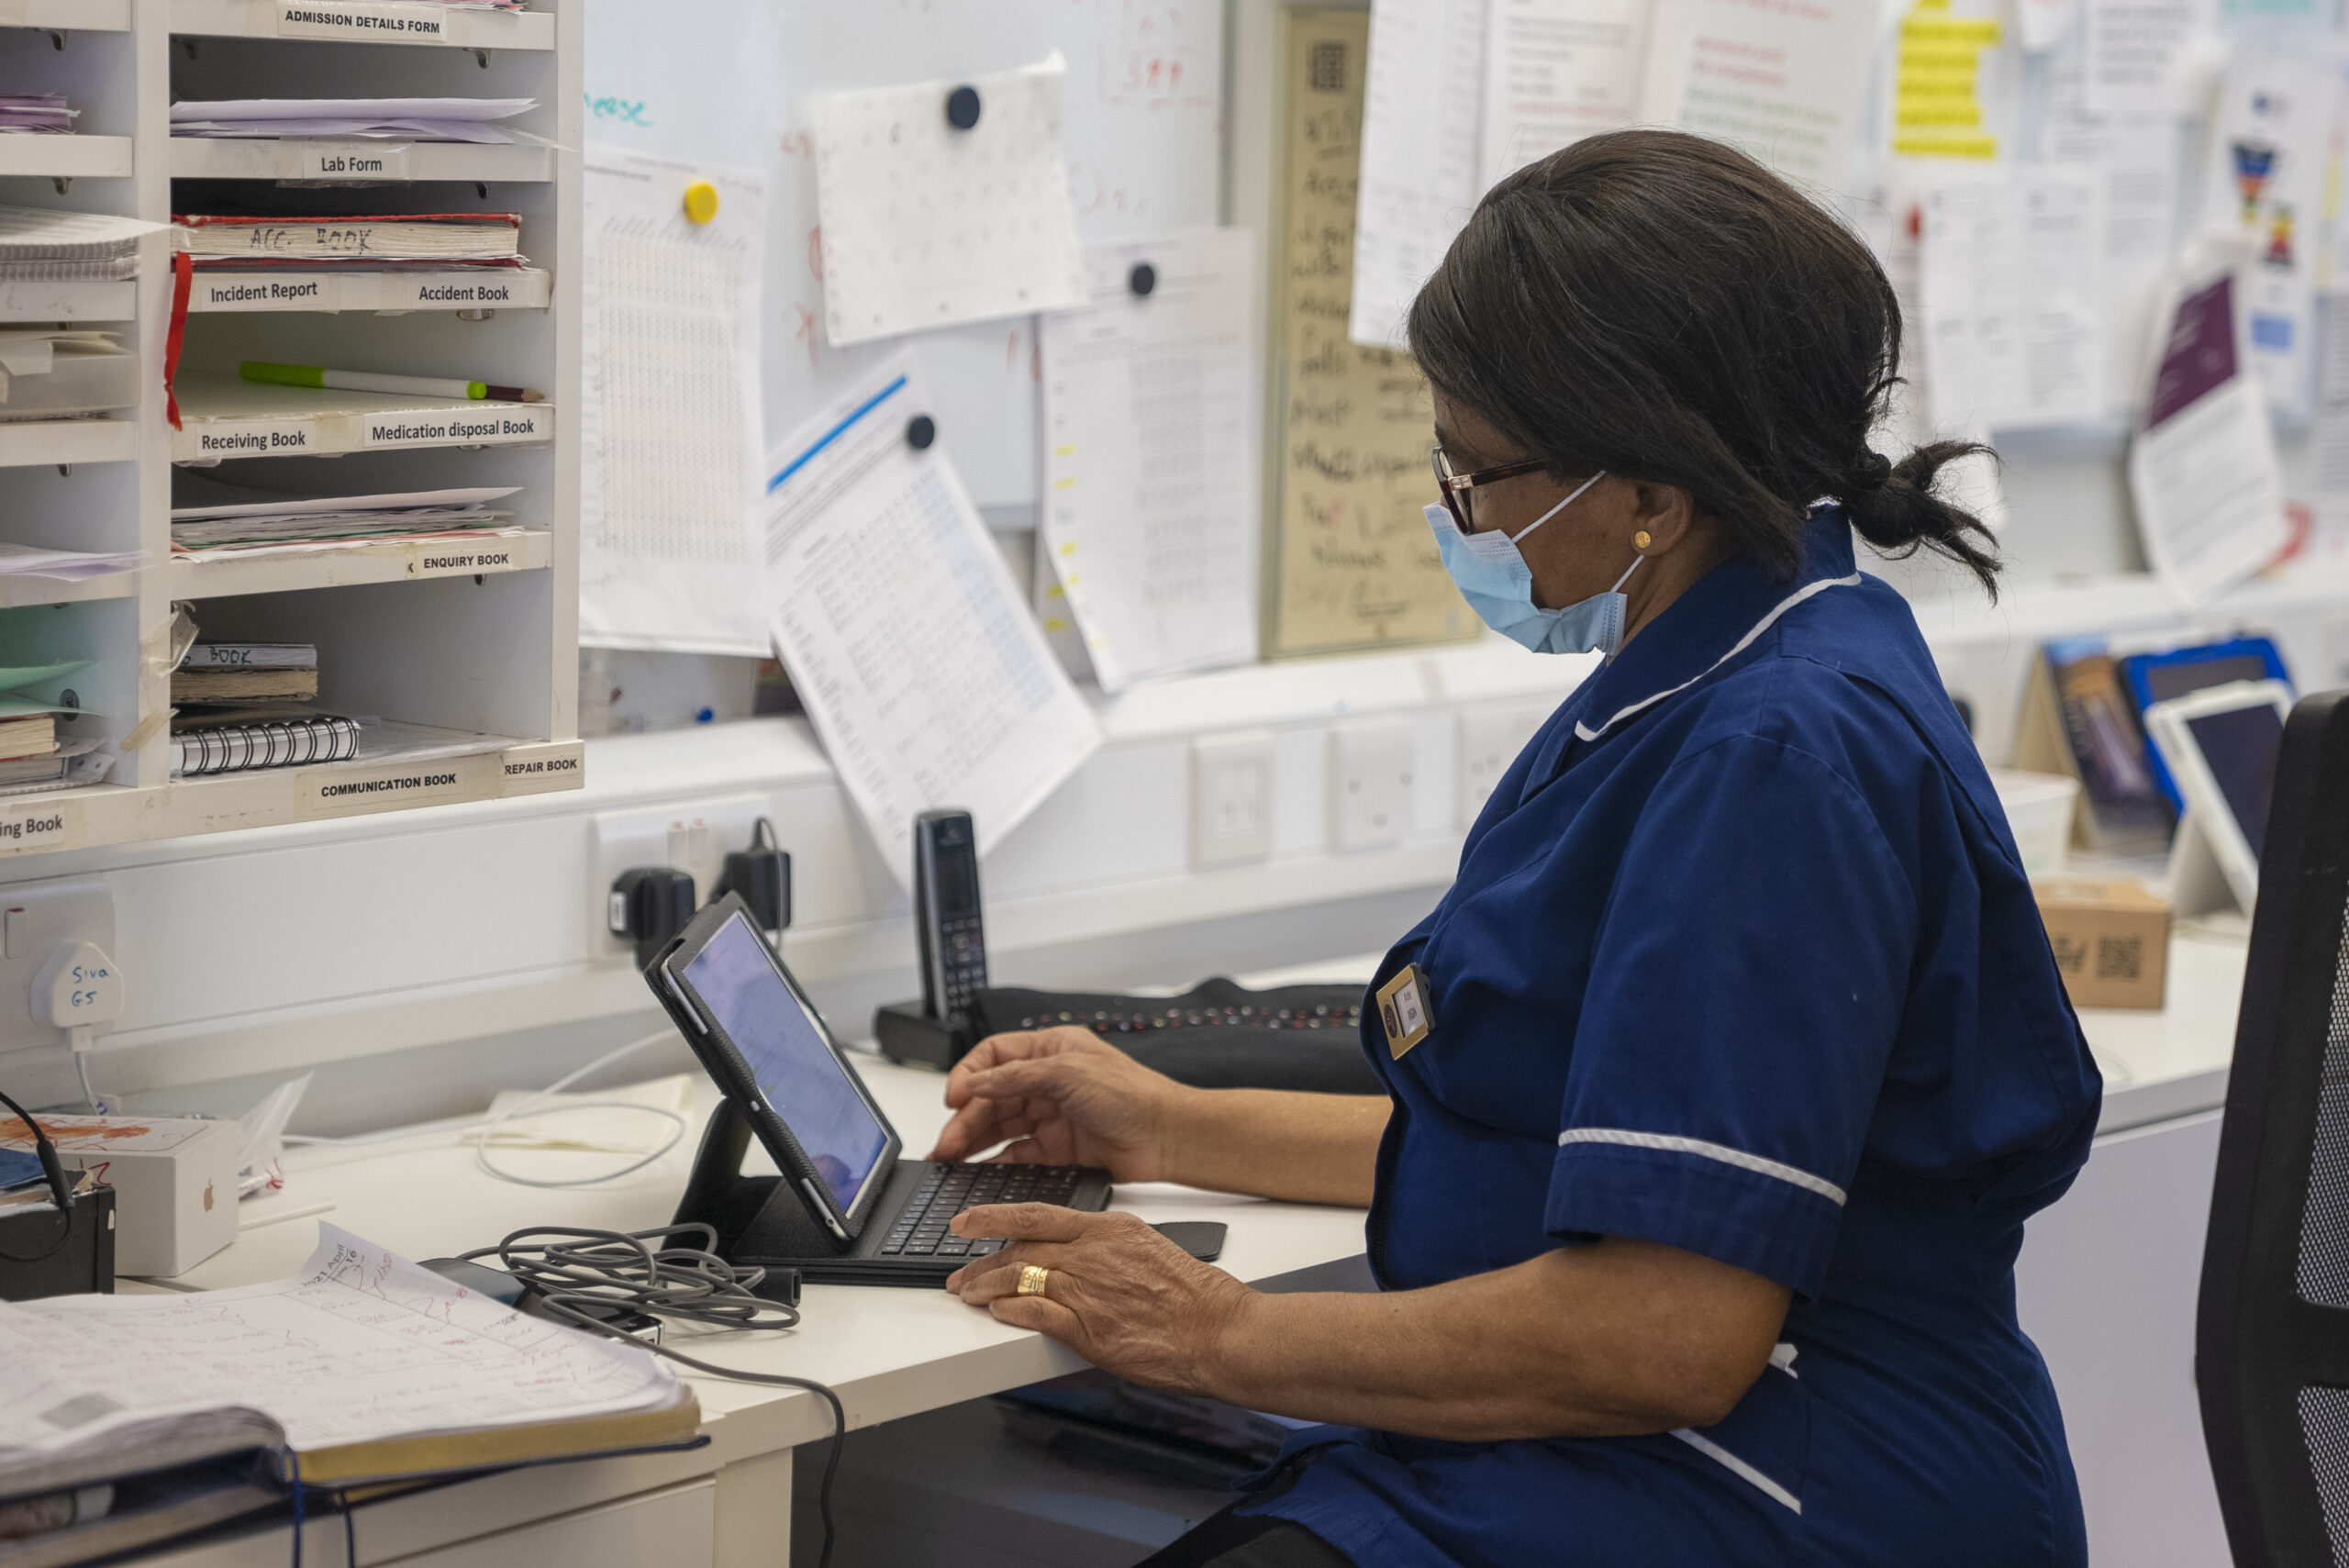 Non-clinical access to residents’ GP records via GP Connect